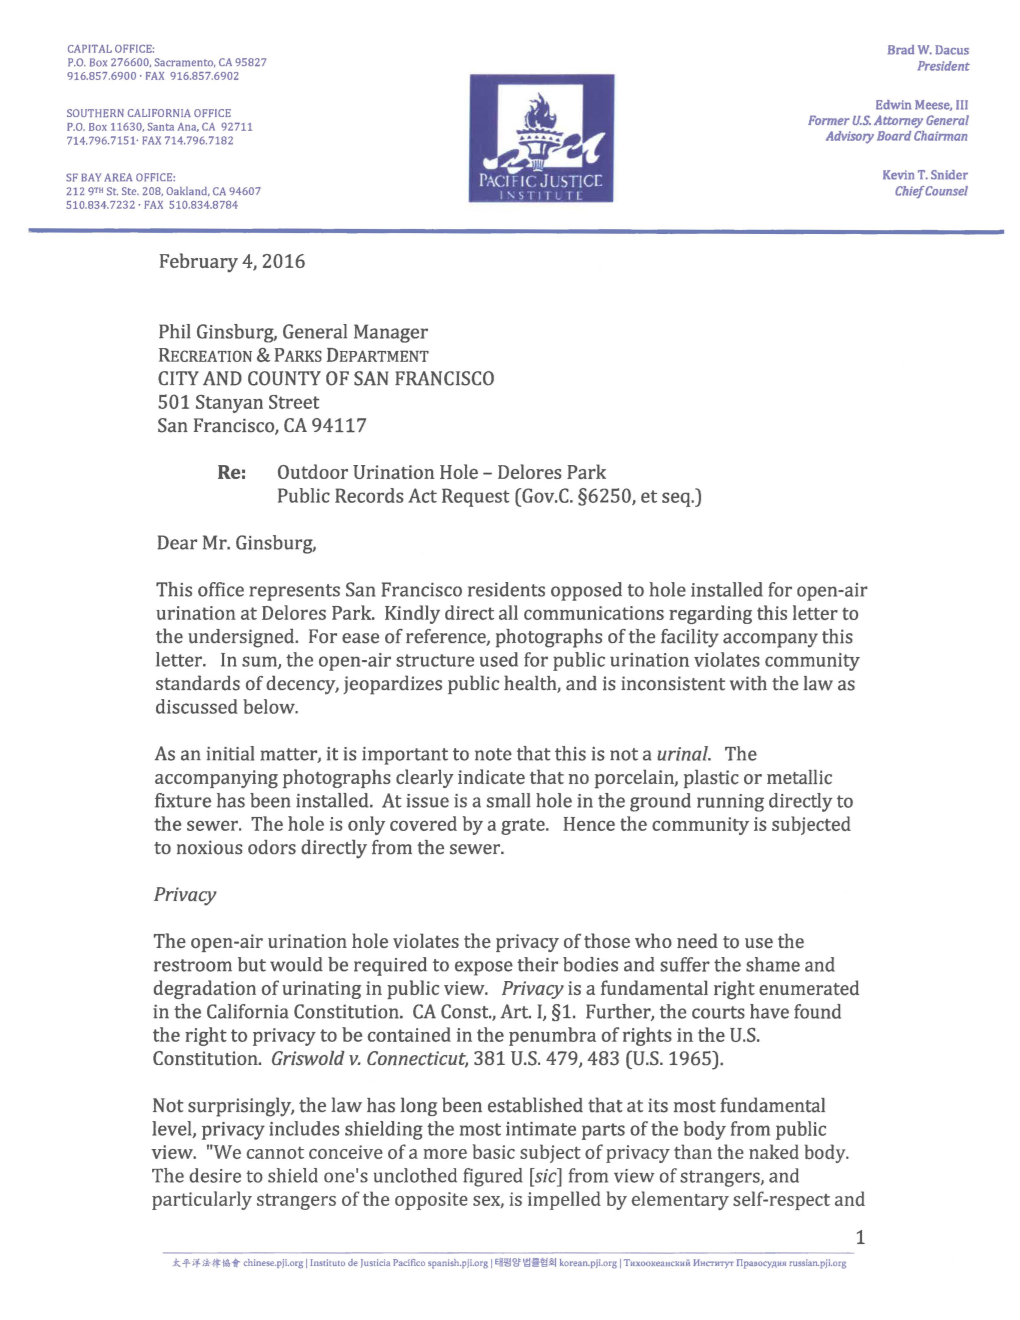 Pacific Justice Institute Letter to Phil Ginsburg